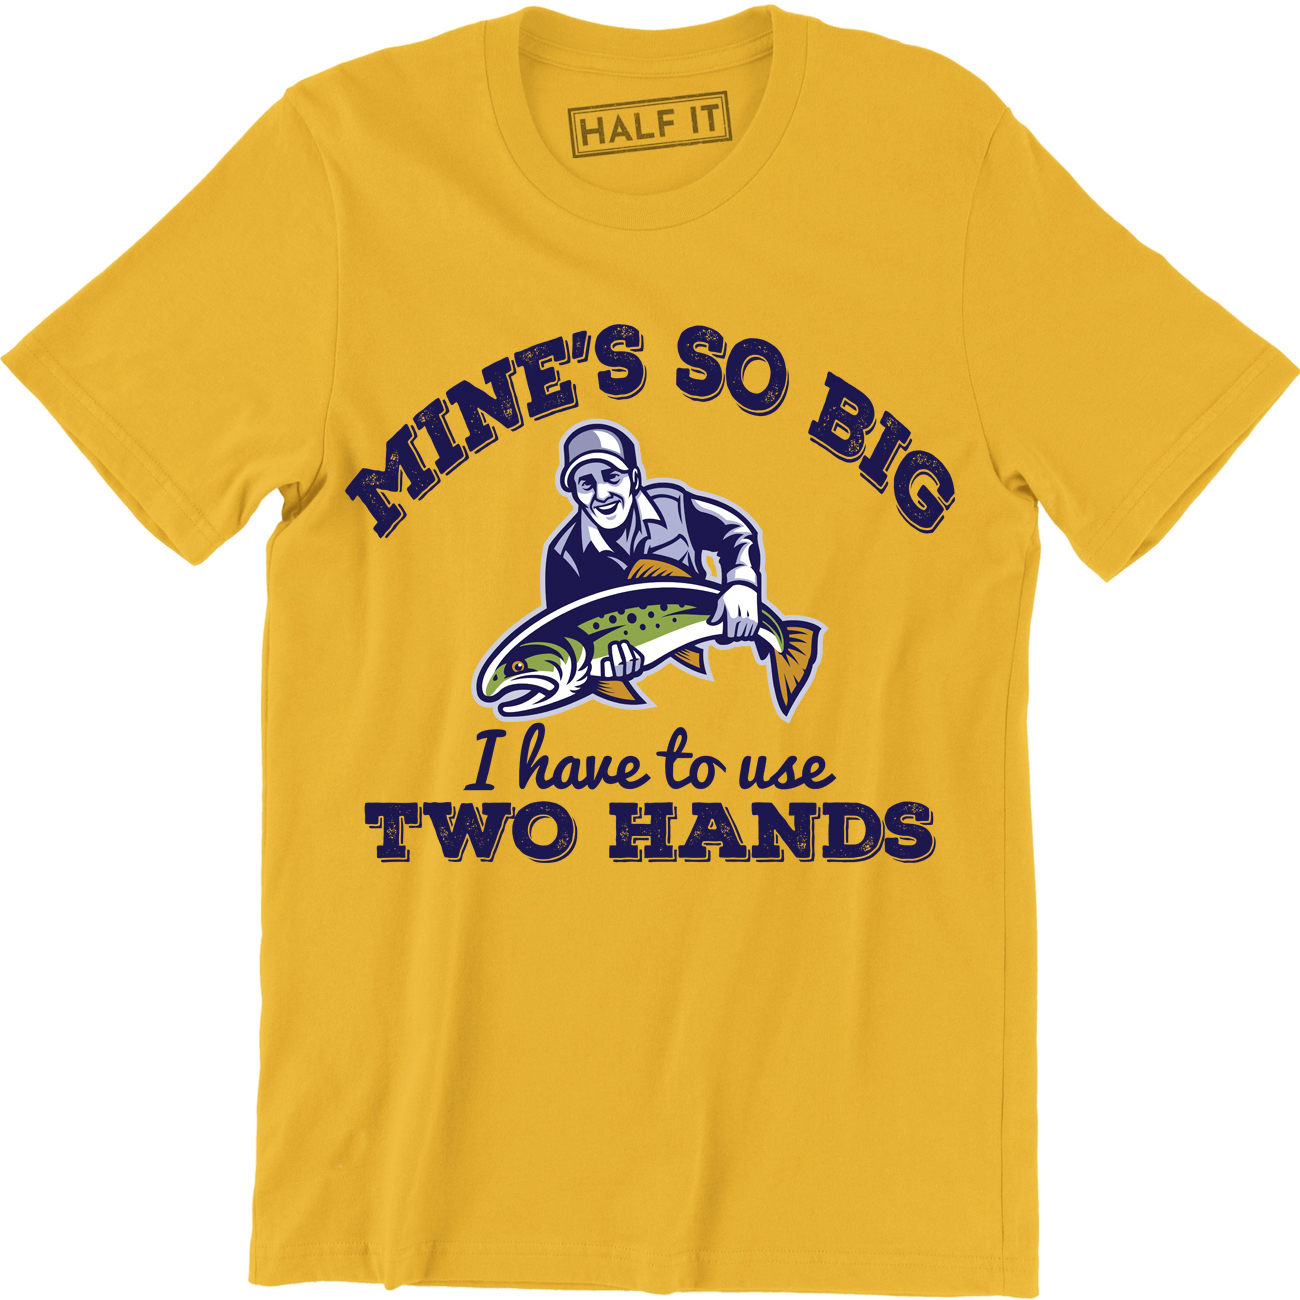 Mine's So Big I Have To Use Two Hands Funny Fishing Men's T-Shirt - image 1 of 4